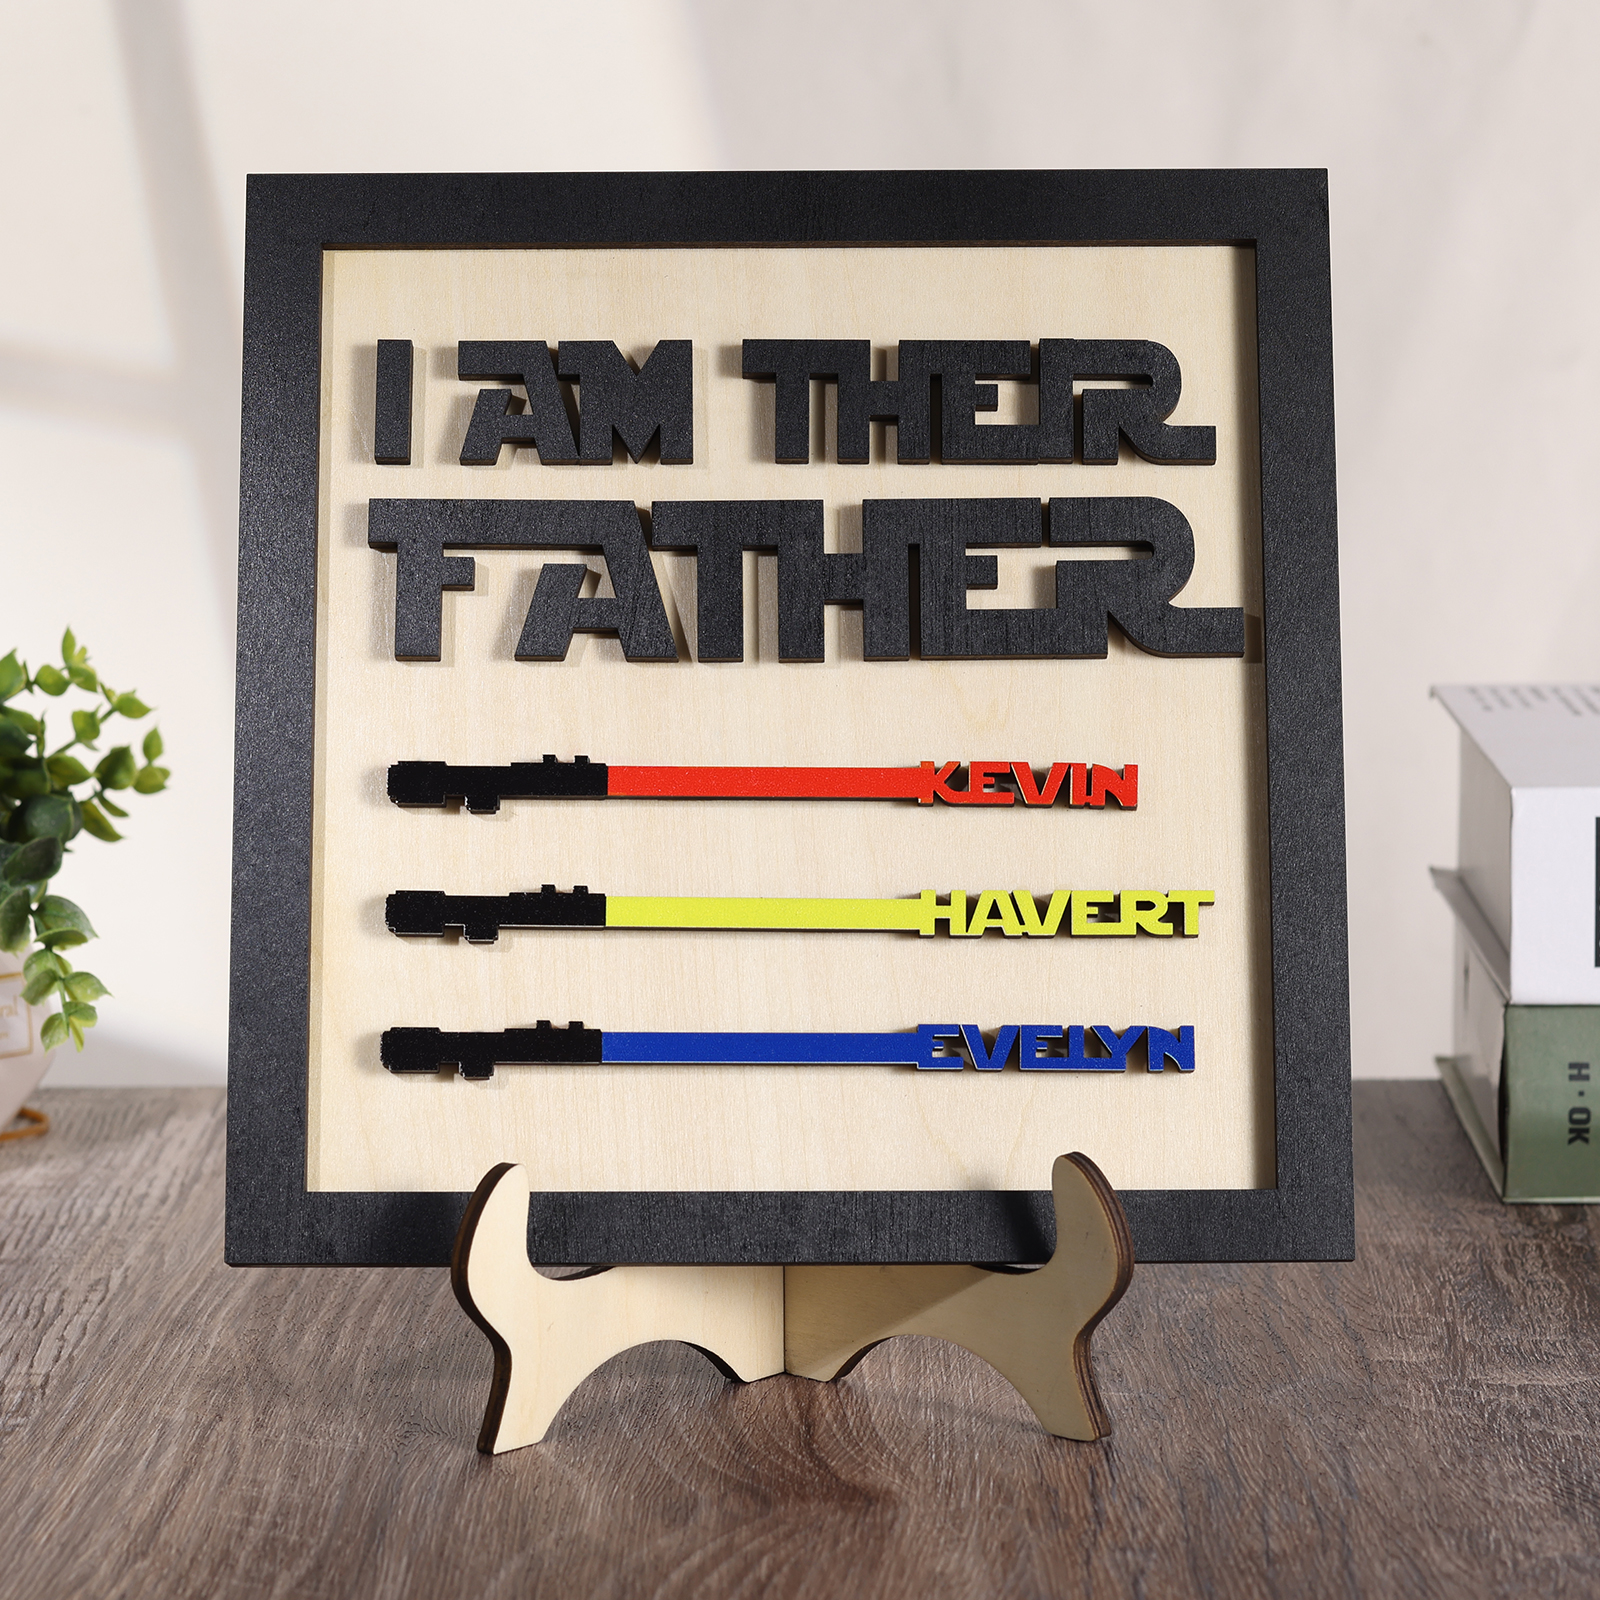 Personalized Star Wars Sign Father's Day Gifts - I AM THEIR FATHER - Wood Sign with 3 Names